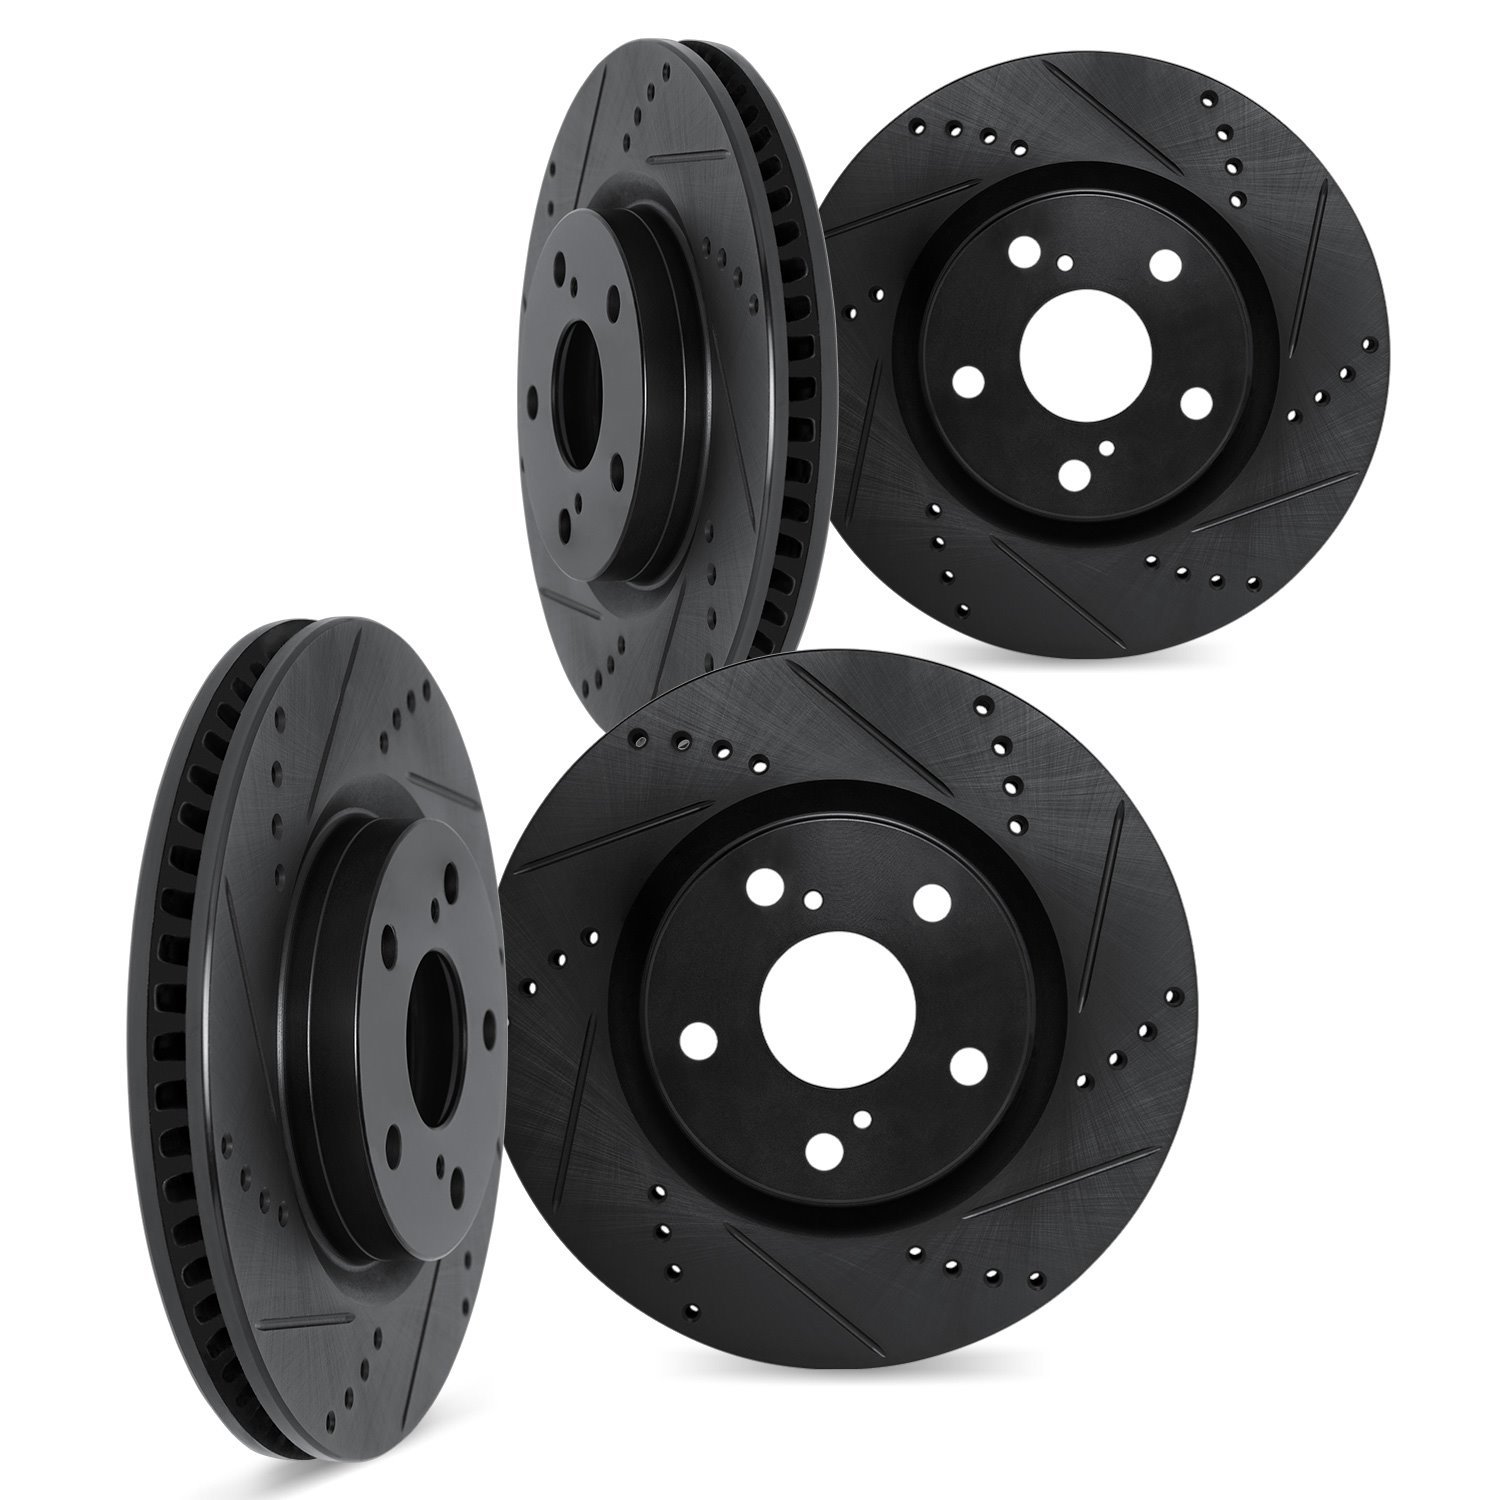 8004-76114 Drilled/Slotted Brake Rotors [Black], 1992-1995 Lexus/Toyota/Scion, Position: Front and Rear